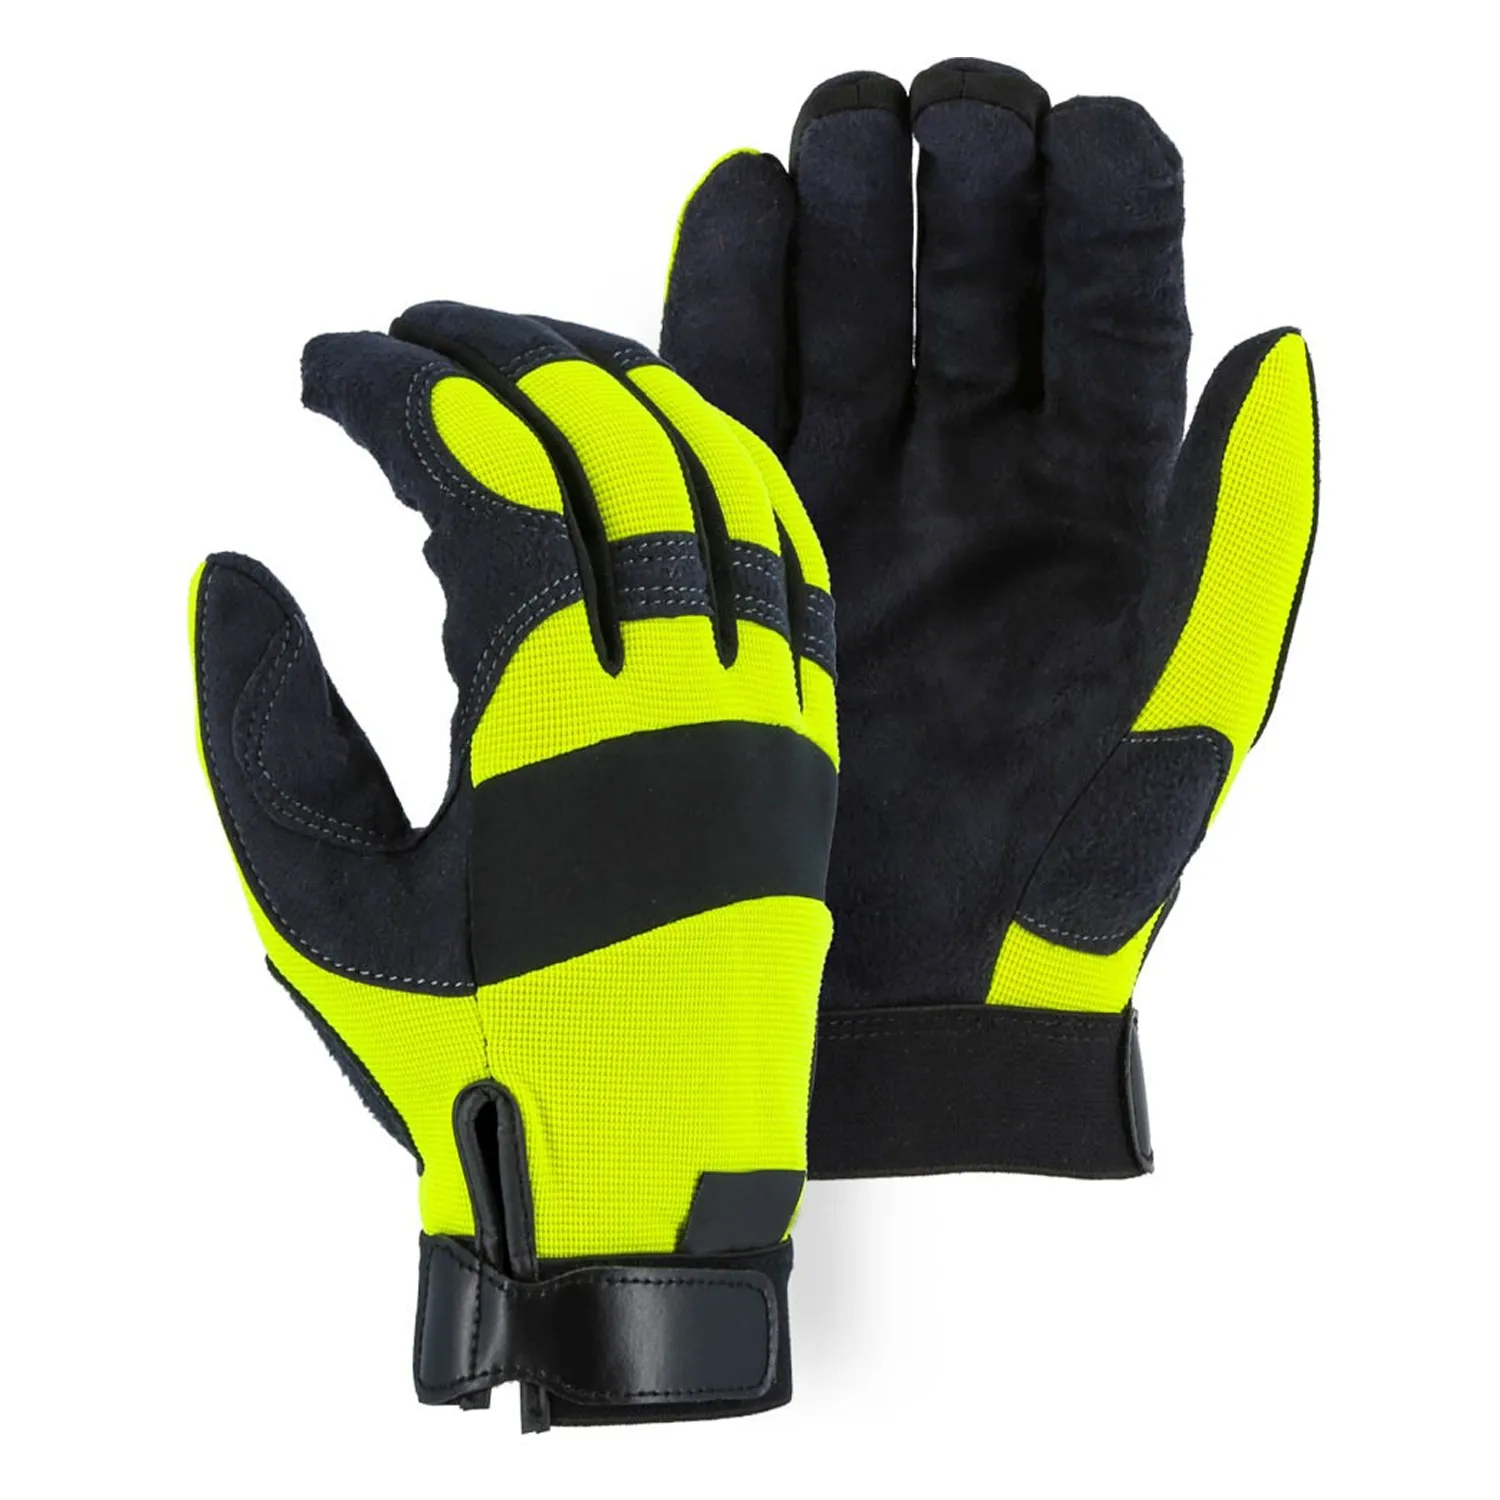 Premium synthetic leather amara mechanic gloves anti vibration safety mechanical work gloves spandex back comfortable hand glove